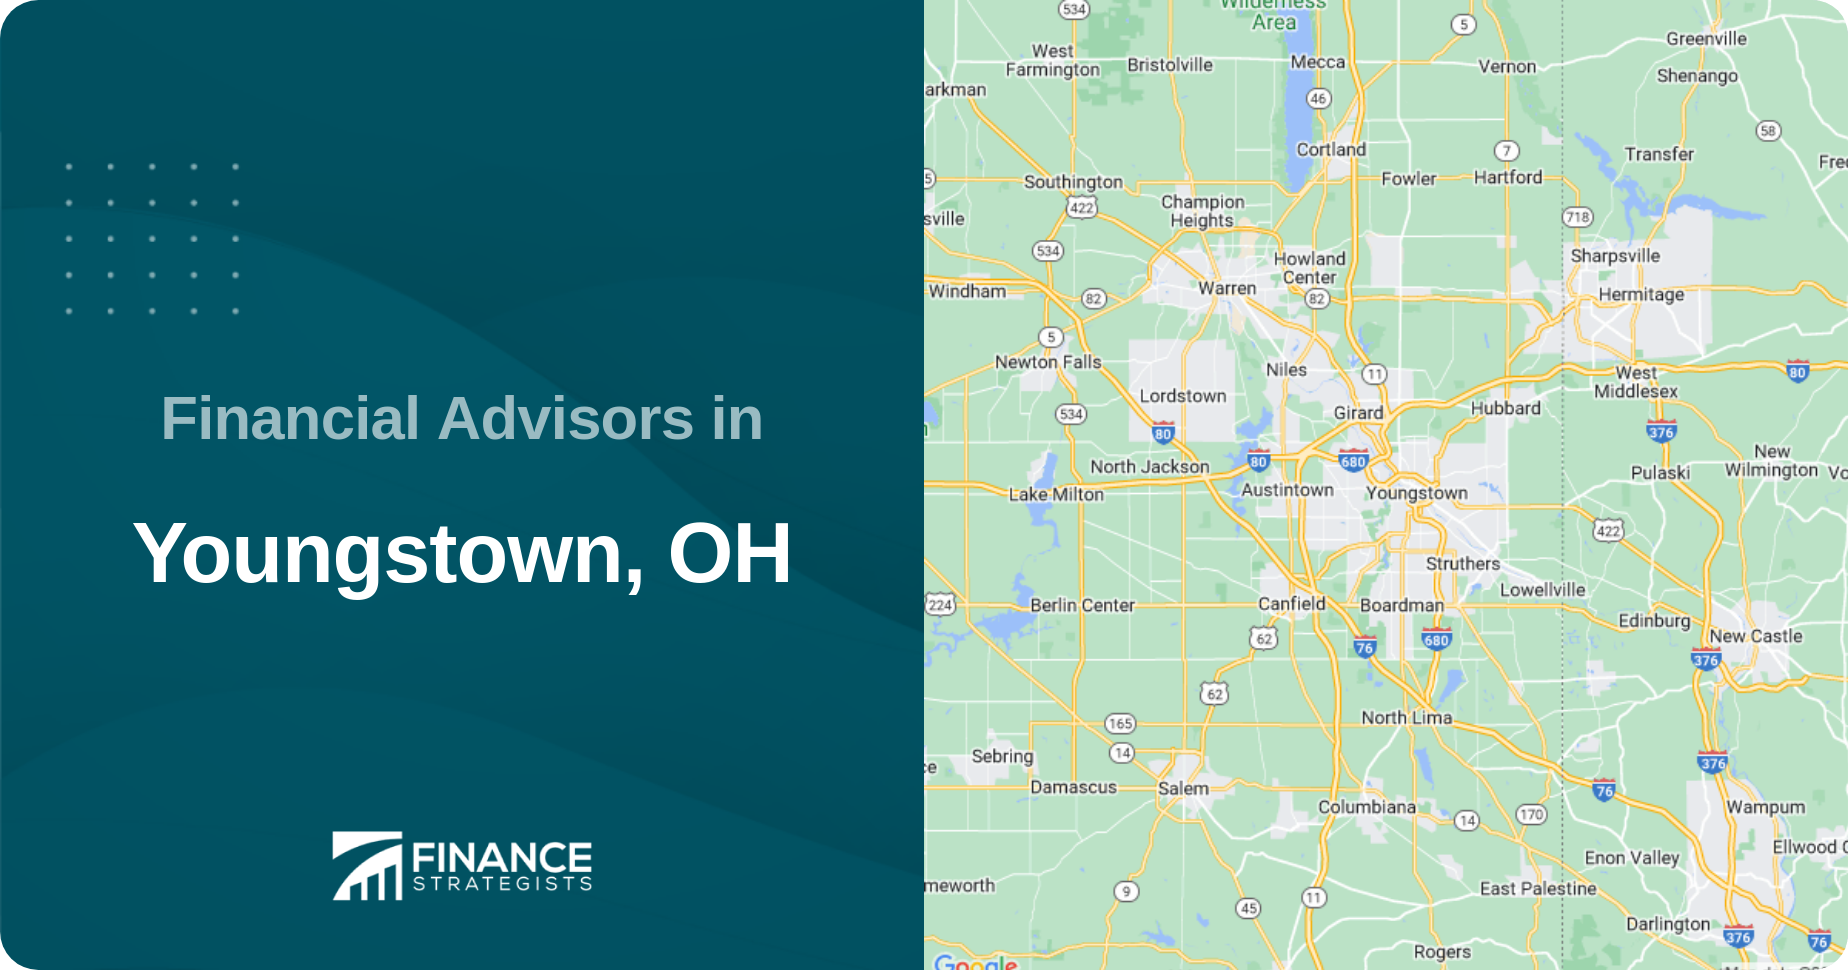 Financial Advisors in Youngstown, OH